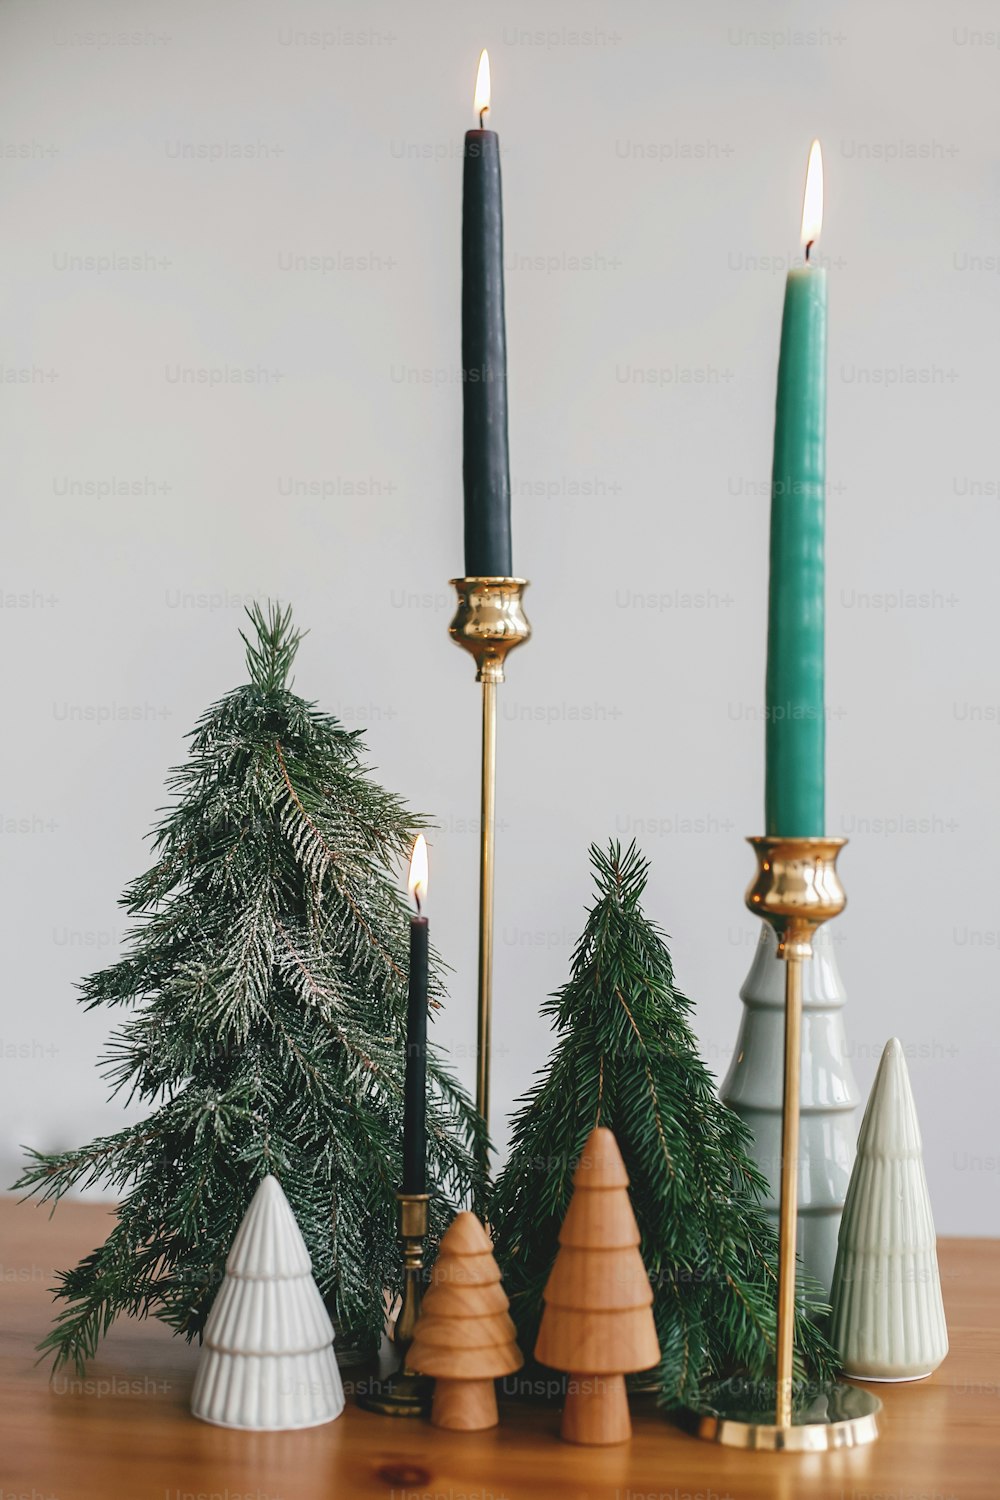 Christmas trees, candles and pine cones on rustic wooden table. Festive modern zero waste decor. Miniature wooden and handmade fir trees. Happy holidays